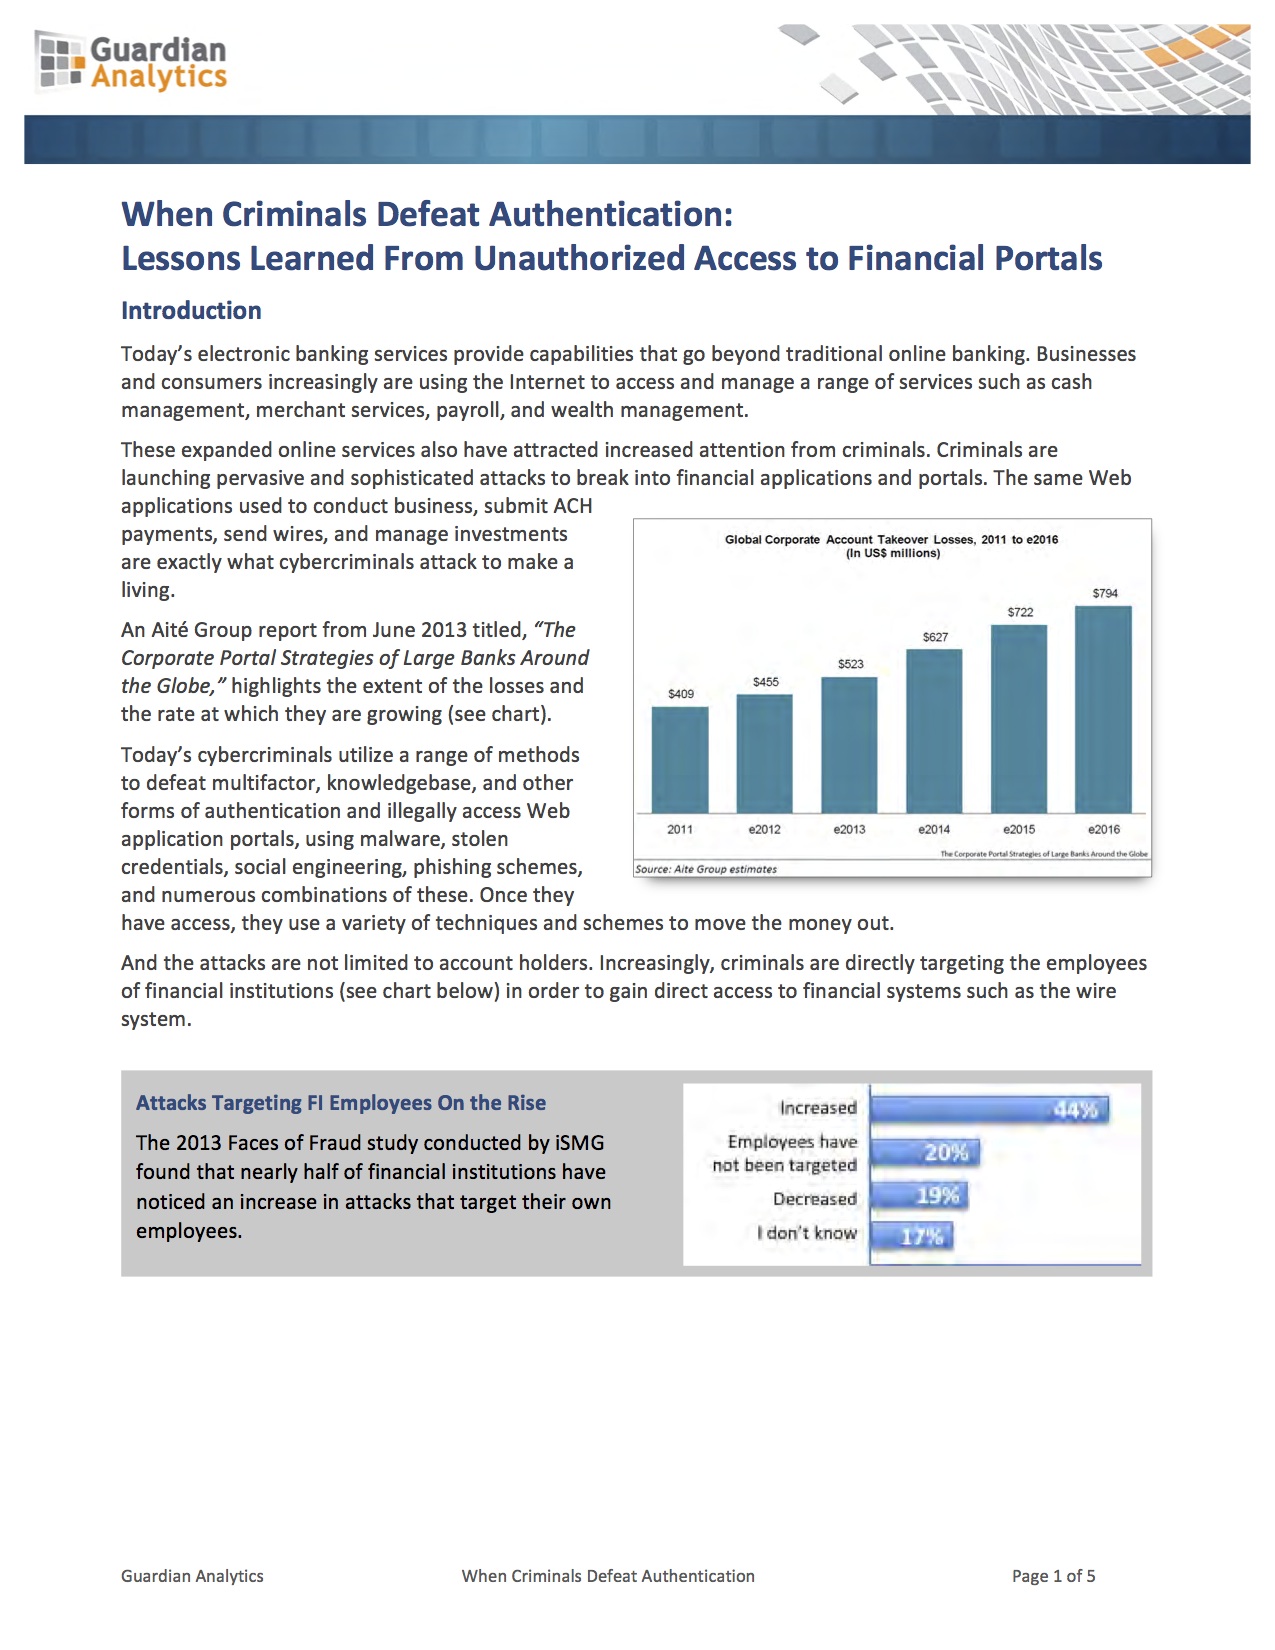 When Criminals Defeat Authentication: Lessons Learned From Unauthorized Access to Financial Portals